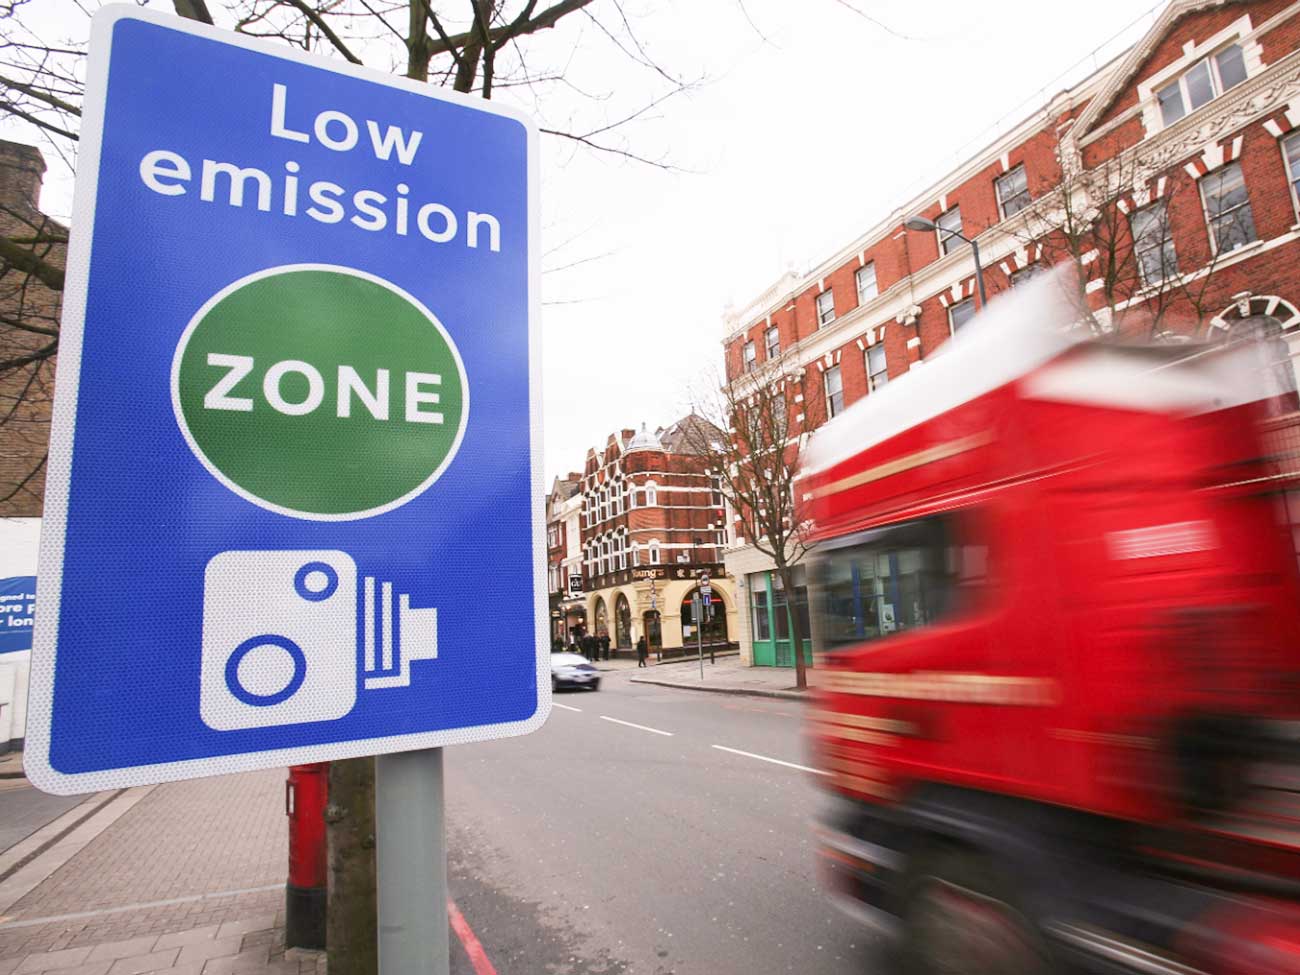 Low emission zone road sign